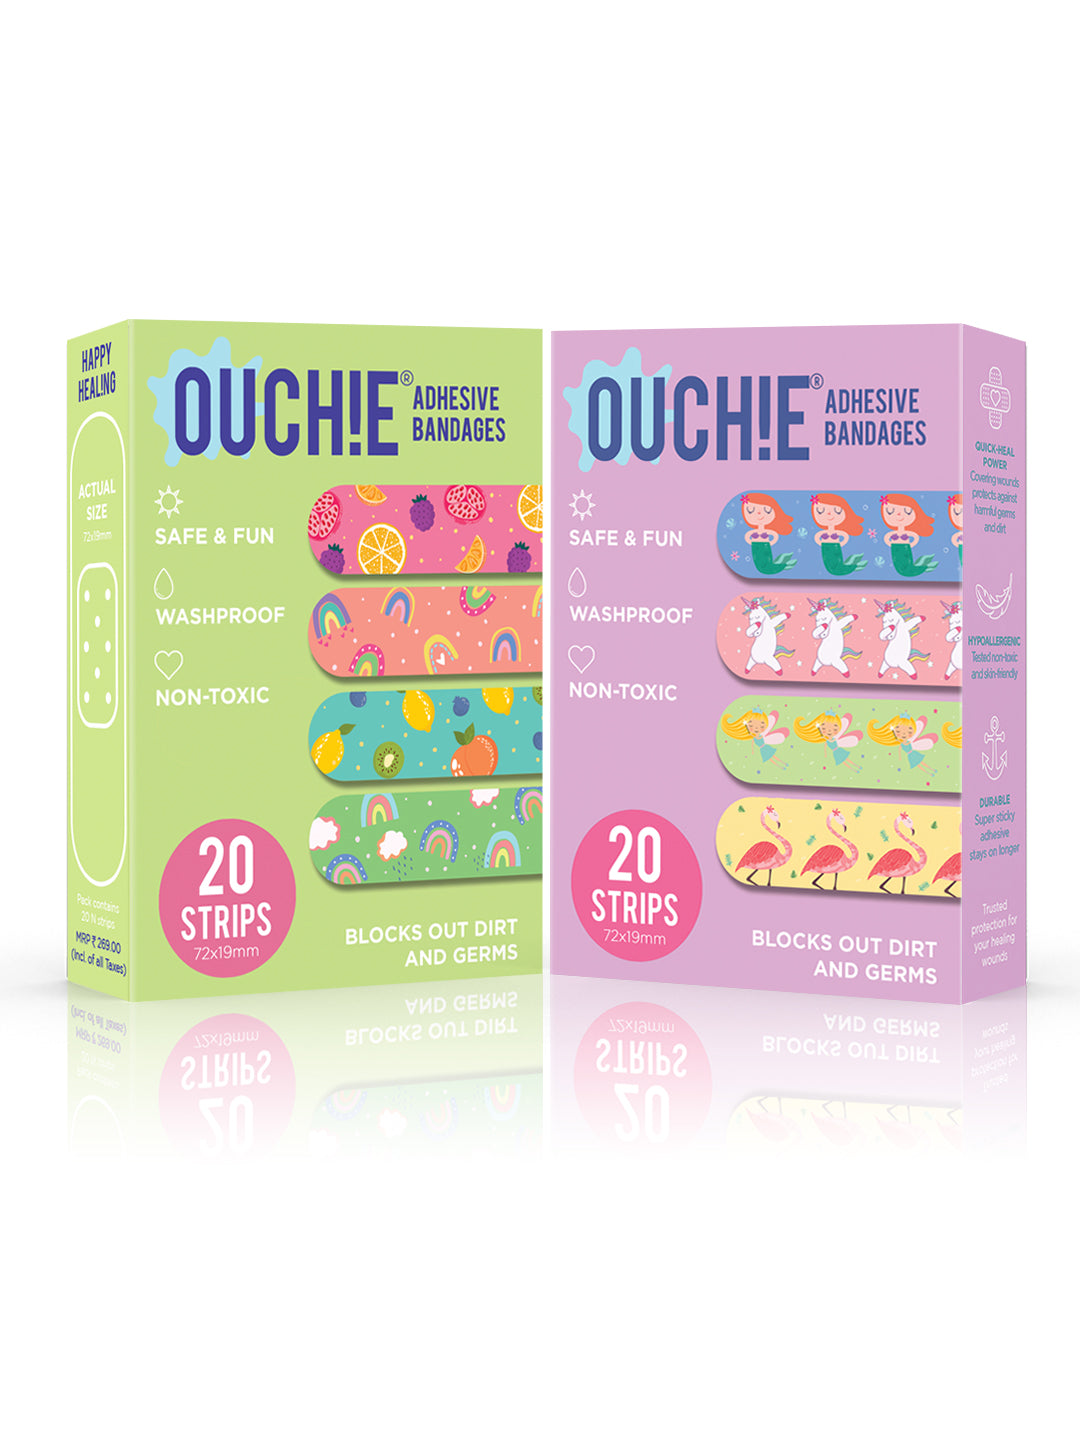 Ouchie Non-Toxic Printed Bandages Double Combo Set (40 Pack) - Lime Green & Lavender